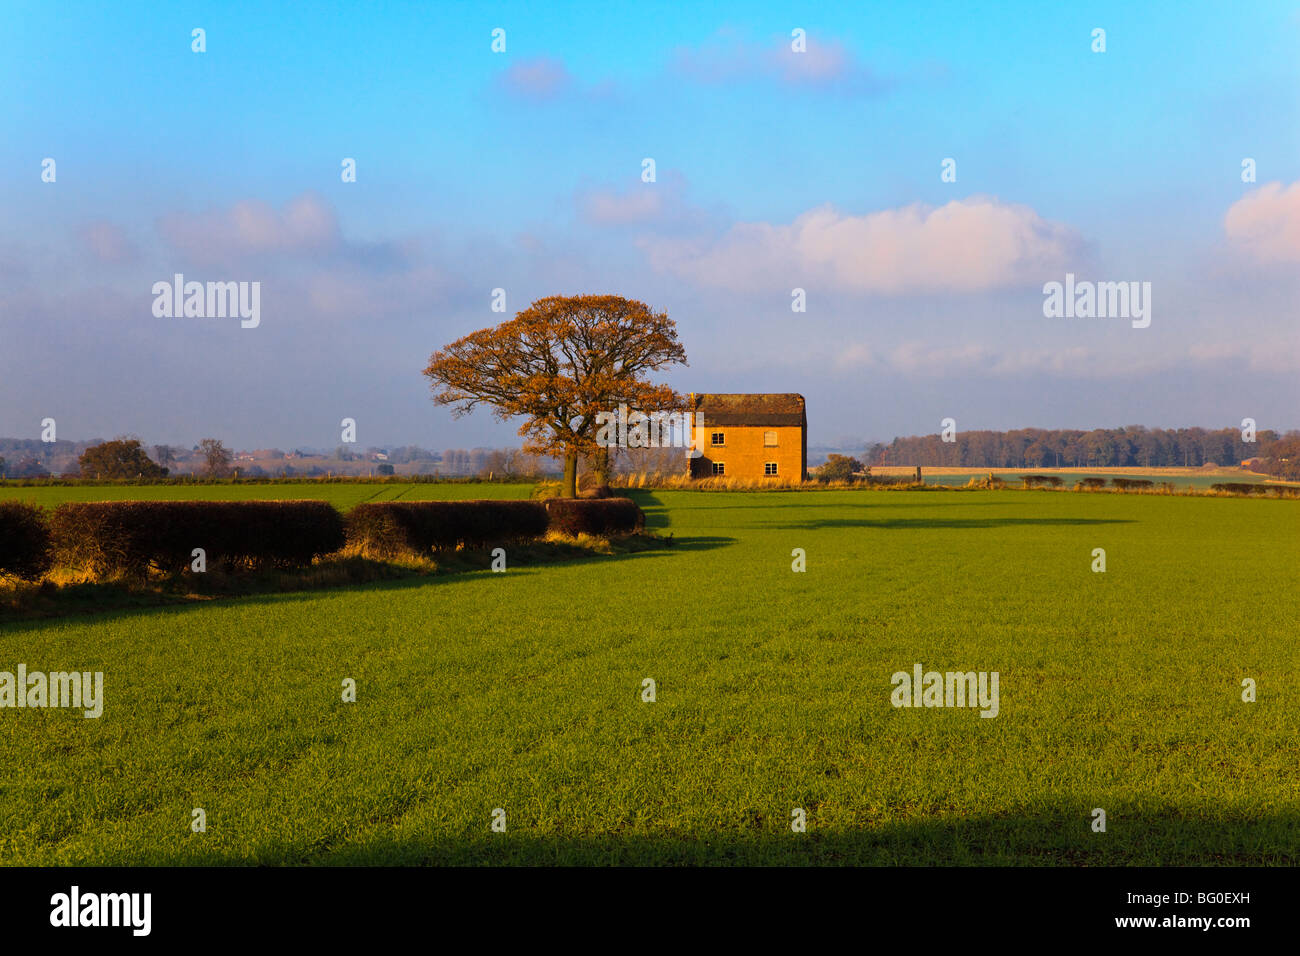 A brick farm building glows in the late afternoon Autumn sun, Sheepy Magna, Leicestershire, UK Stock Photo